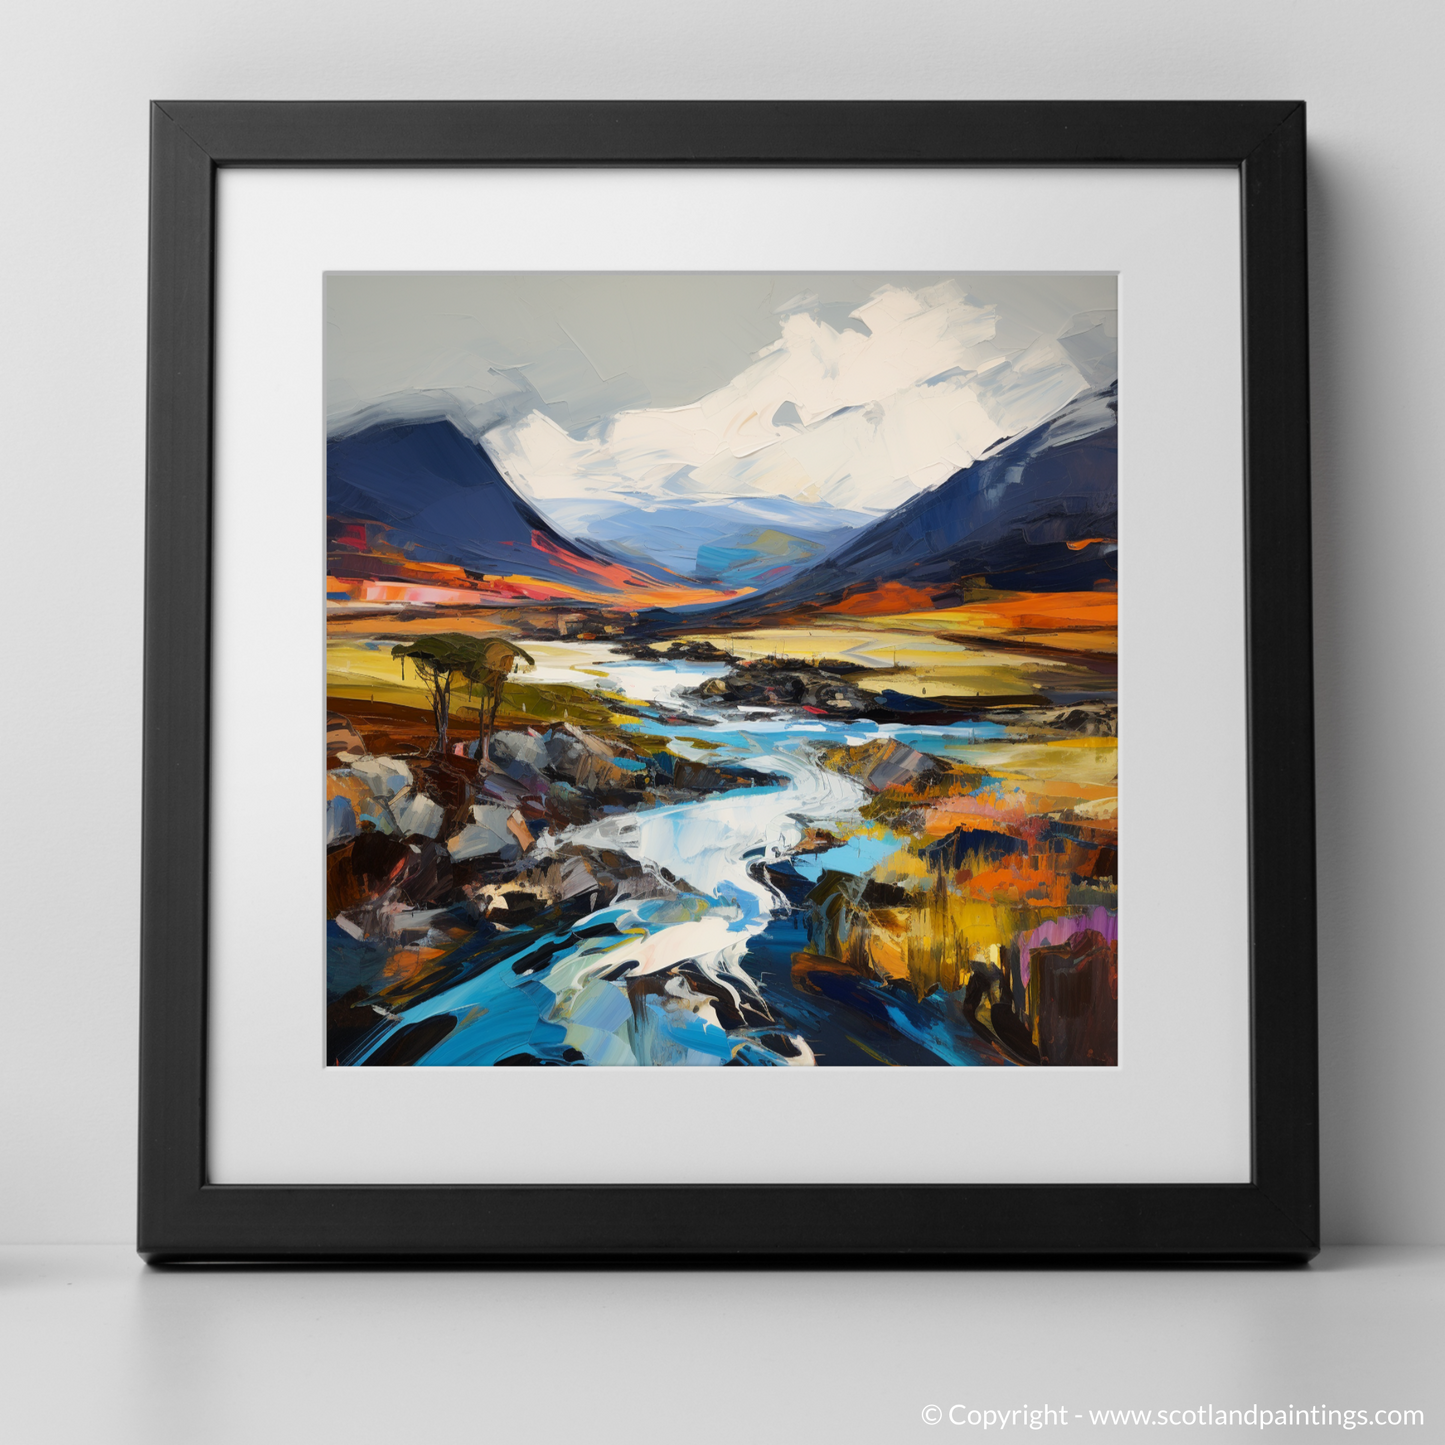 Art Print of Geal-chàrn (Drumochter) with a black frame